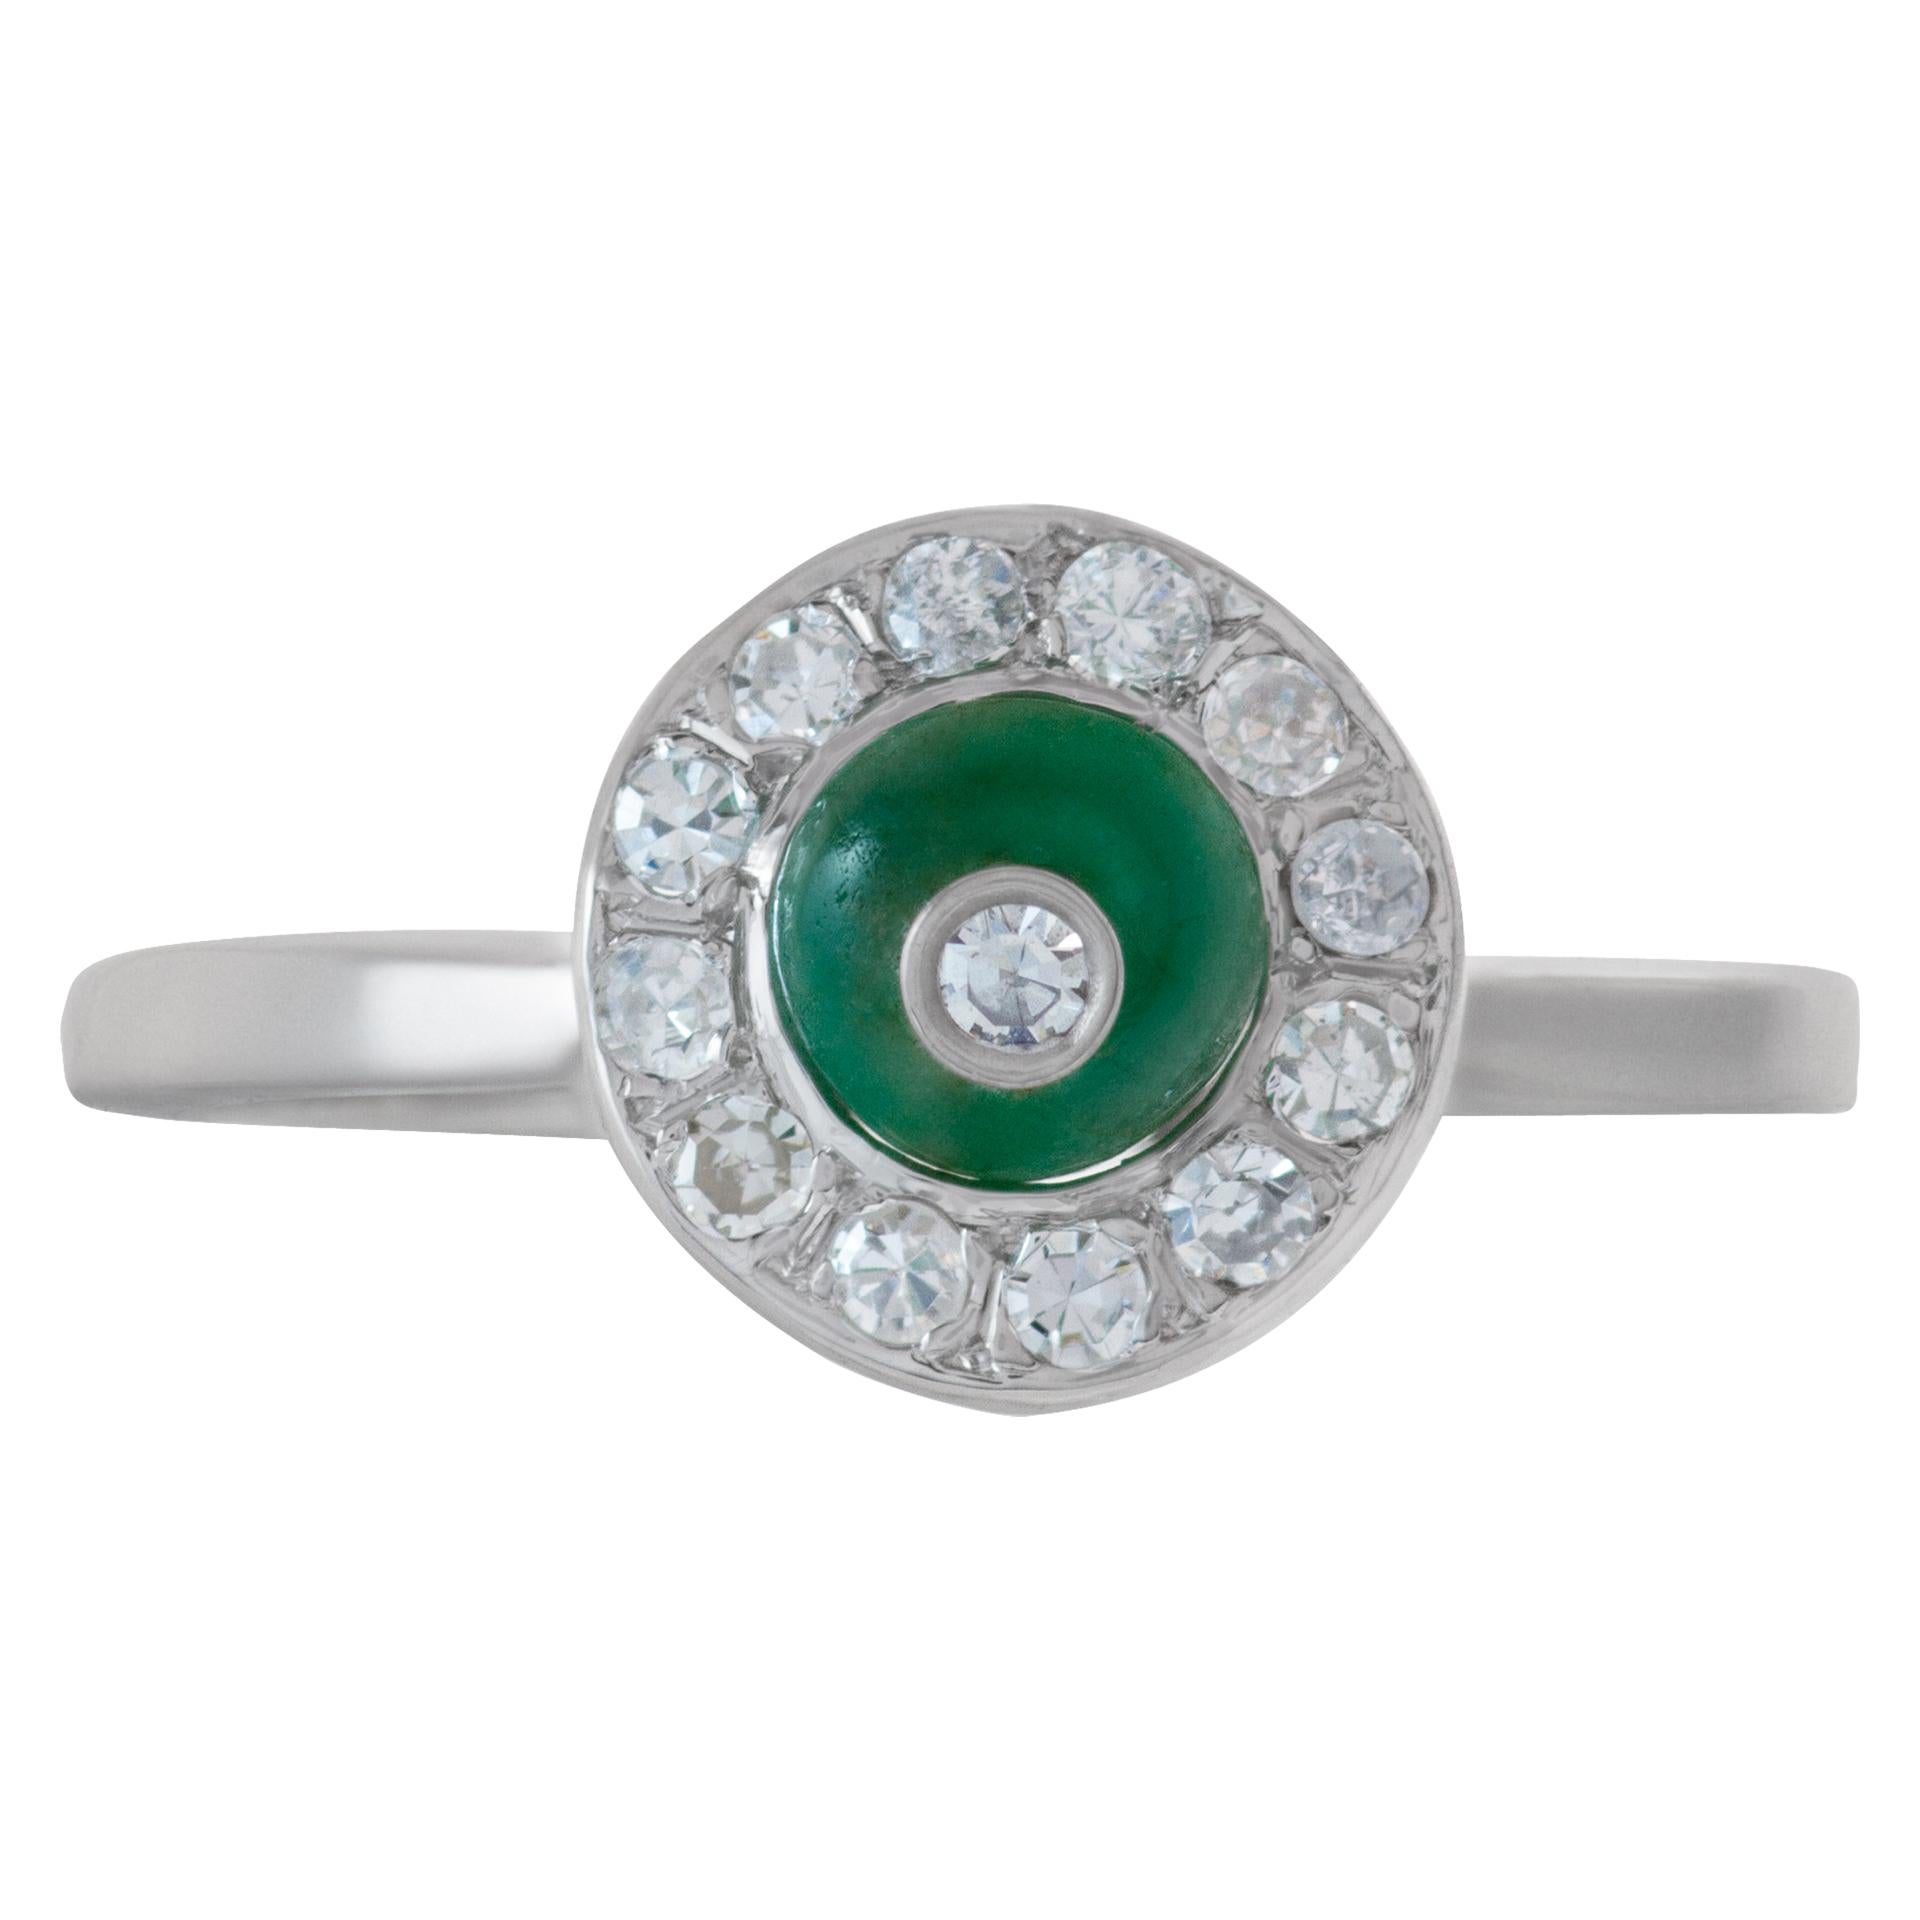 Beautifull 14k white gold diamond and jade stone ring. Ring size 7.25, head measures 10mm, shank 0.7mm.

This Diamond ring is currently size 7.25 and some items can be sized up or down, please ask! It weighs 1.8 pennyweights and is 14k White Gold.